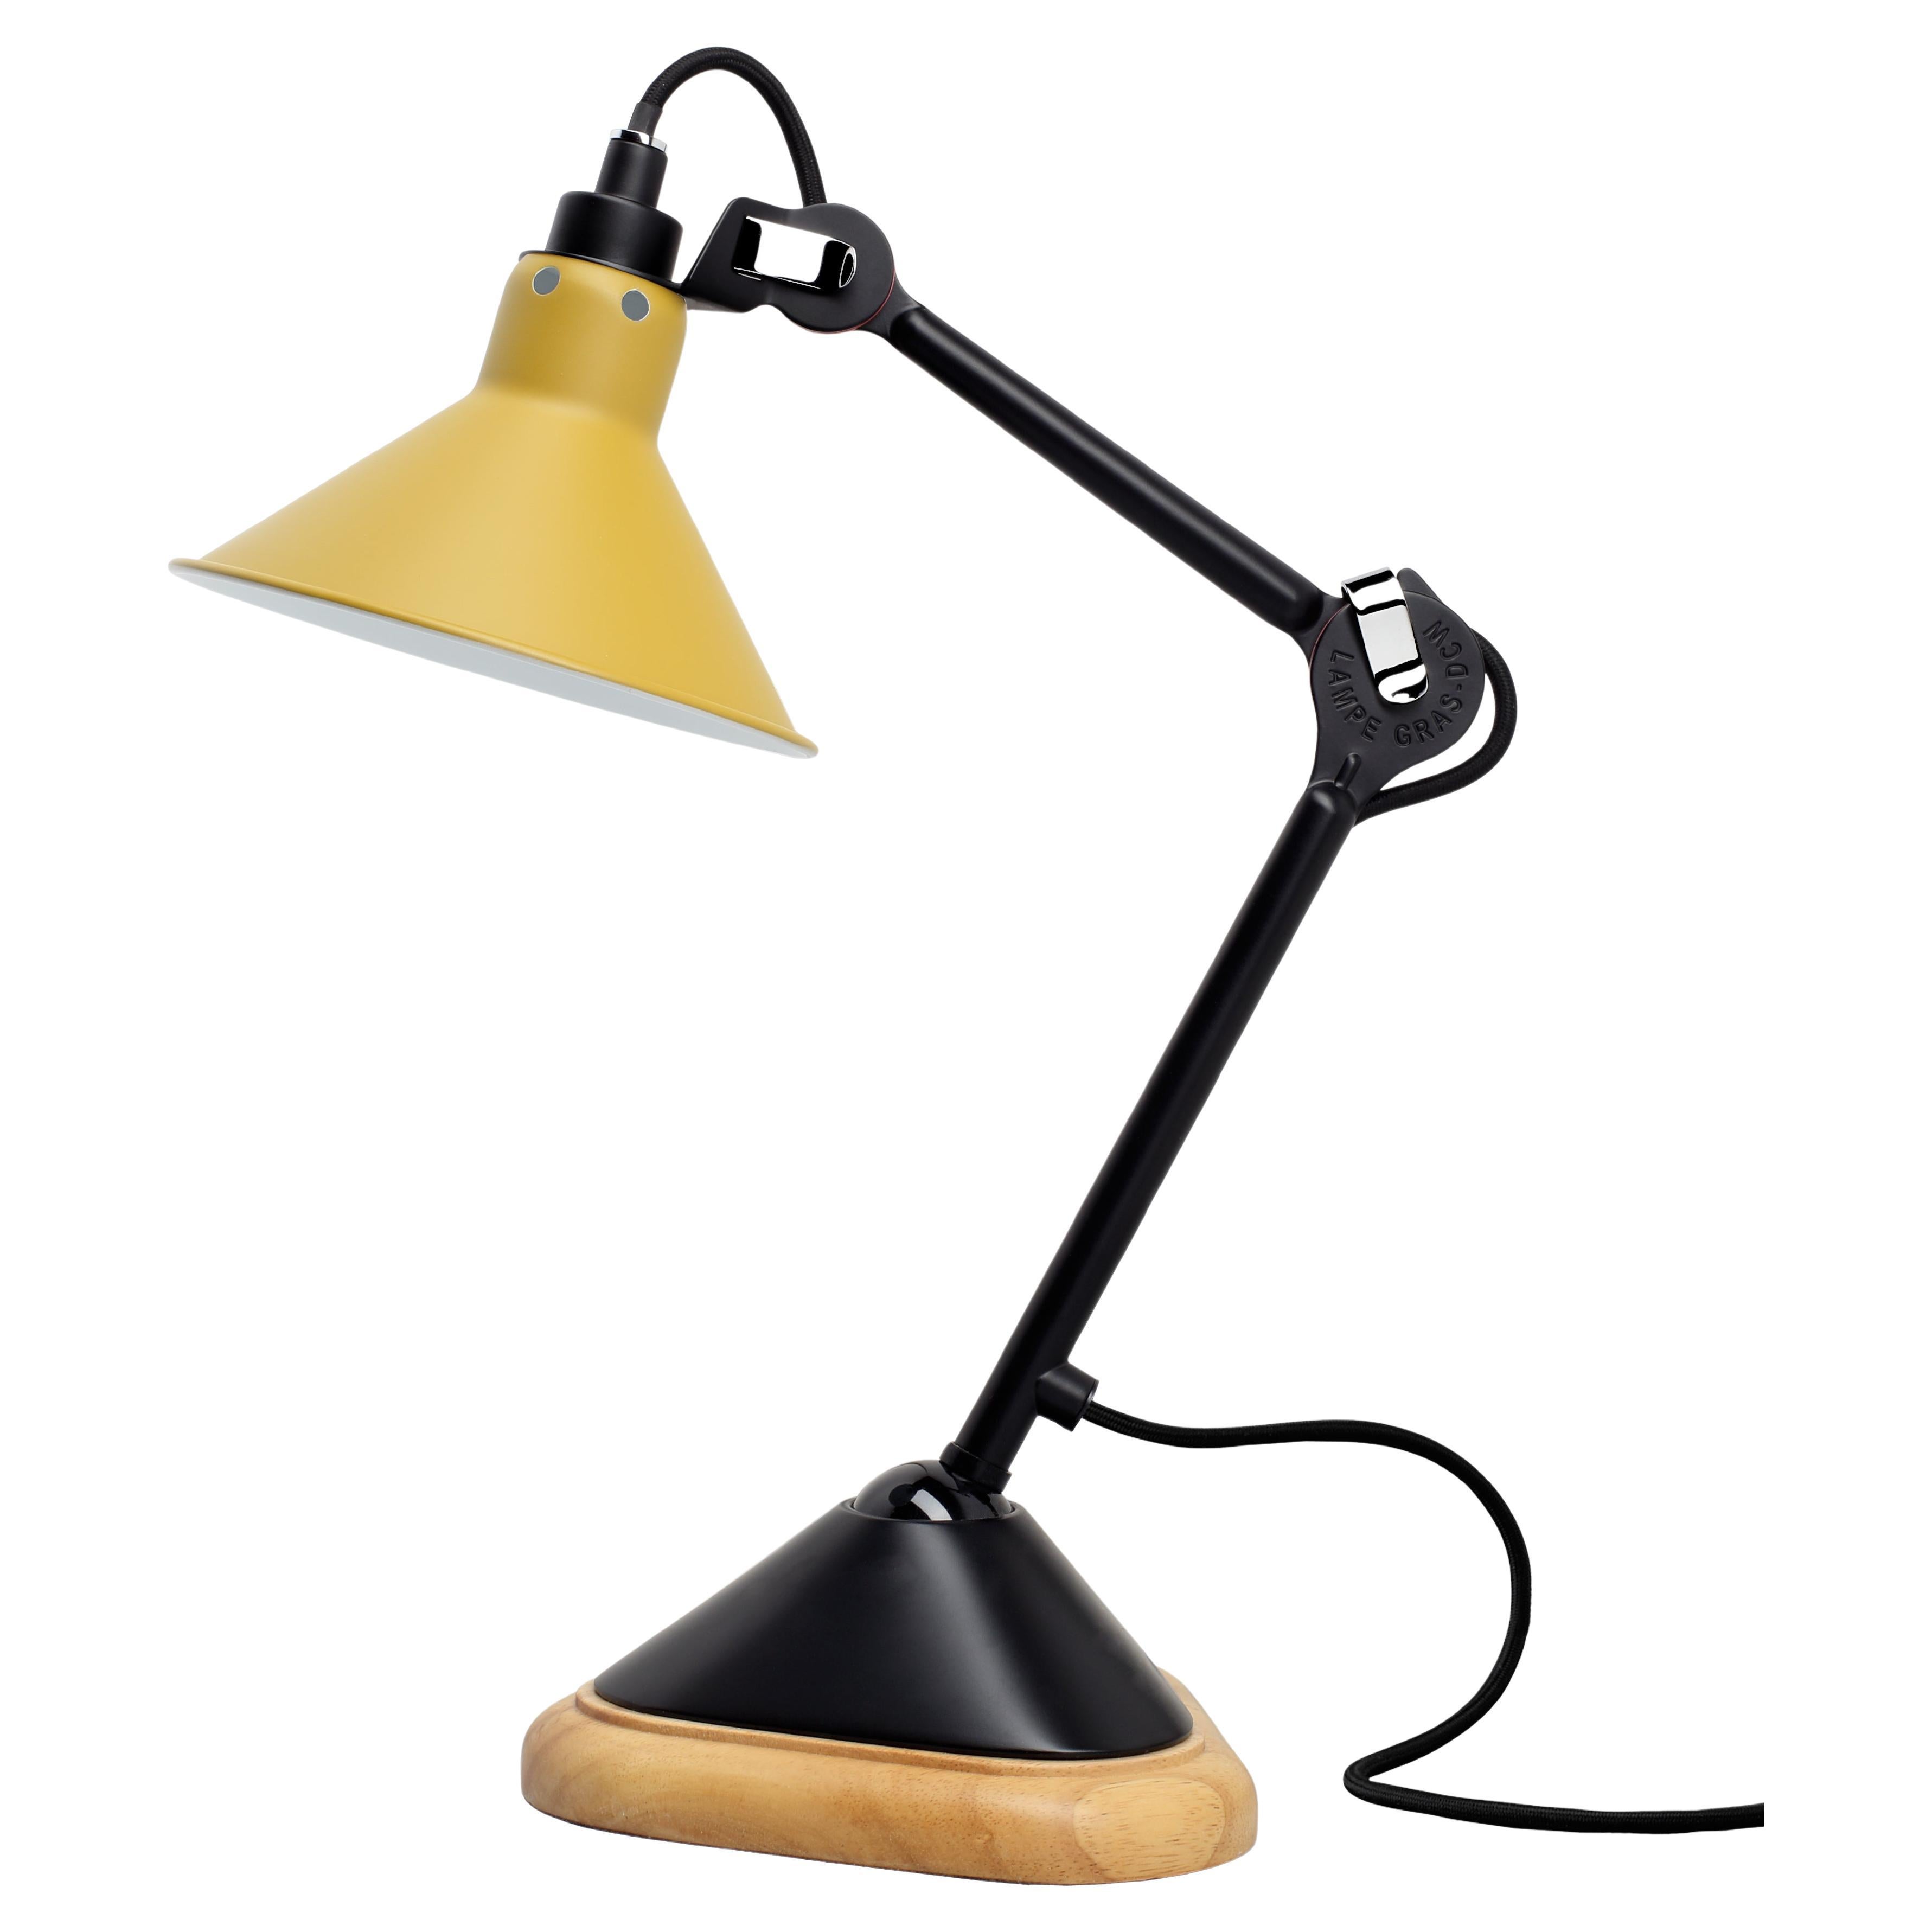 DCW Editions La Lampe Gras N°207 Conic Table Lamp in Black Arm with Yellow Shade